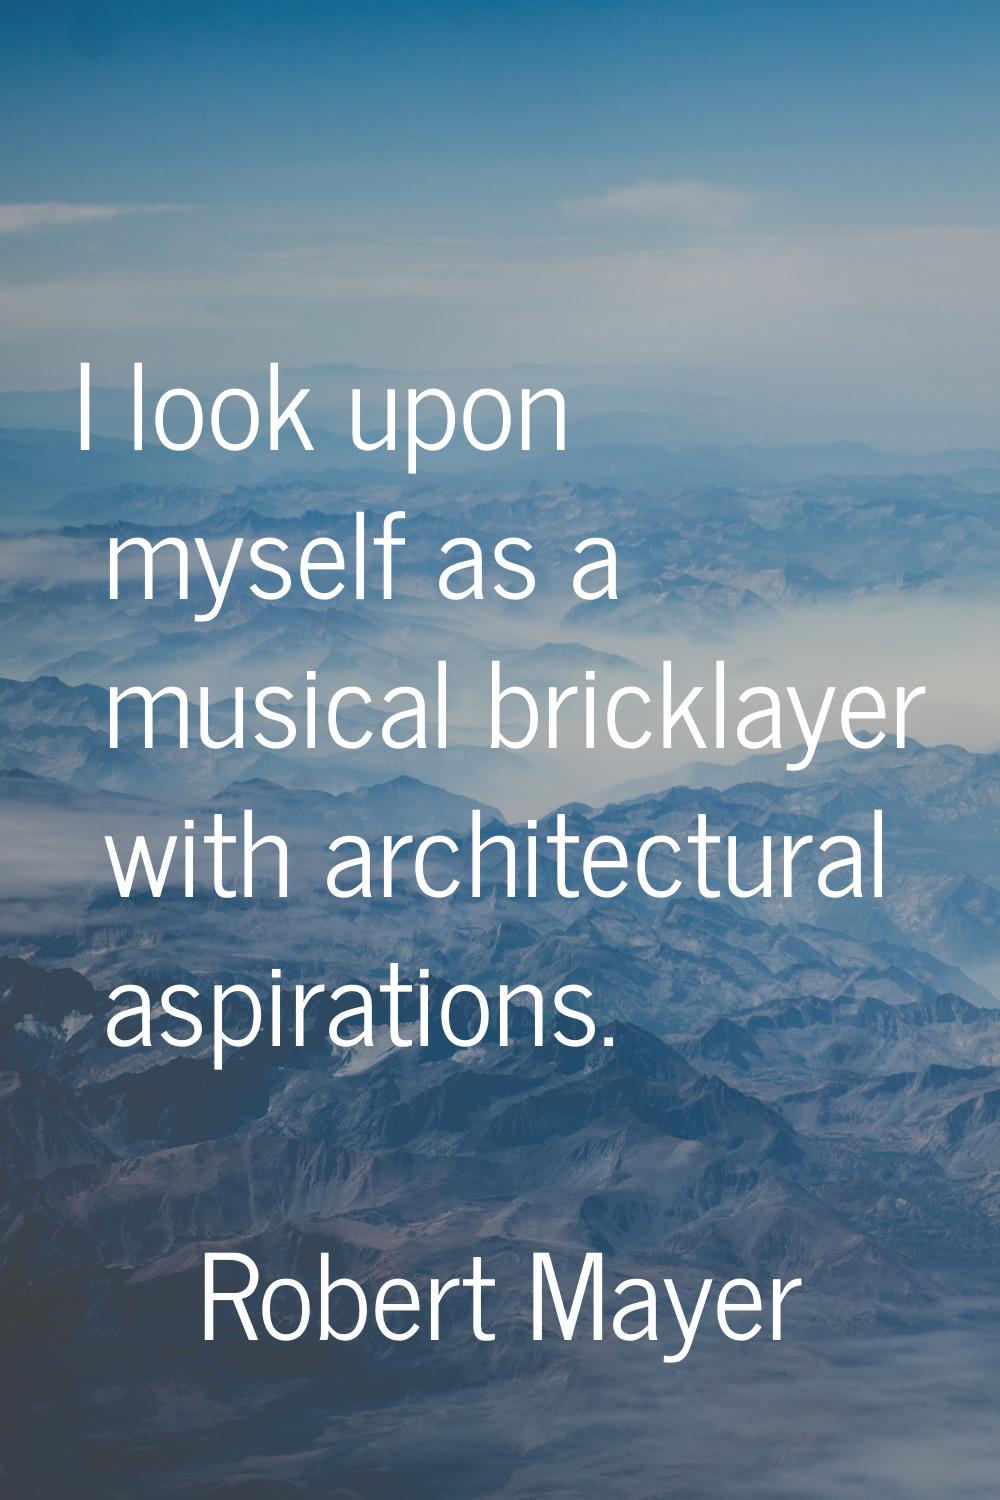 I look upon myself as a musical bricklayer with architectural aspirations.